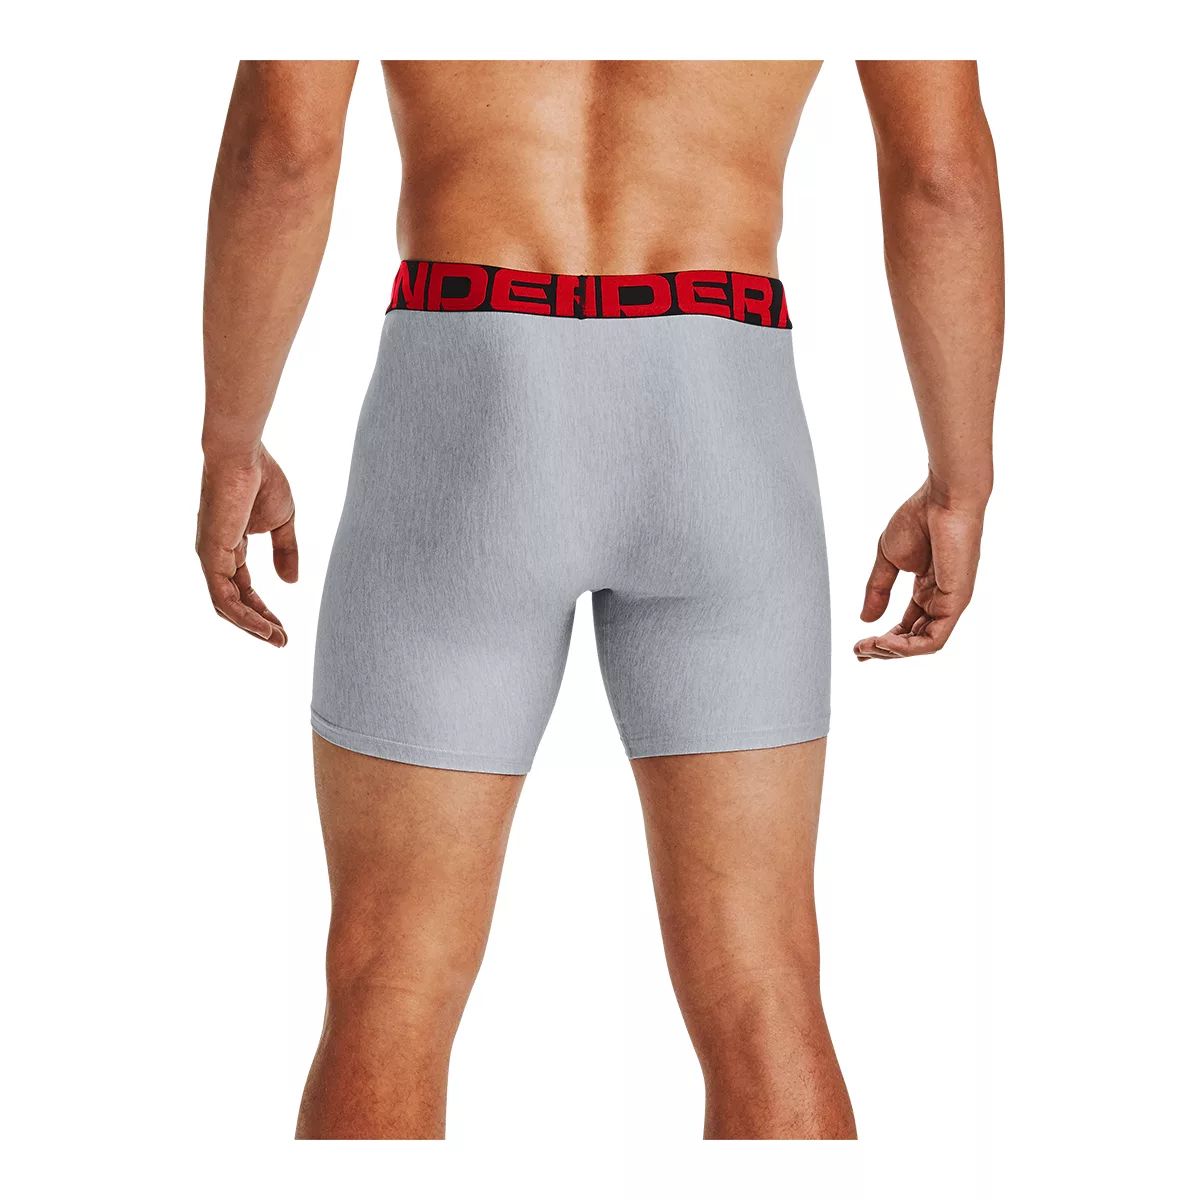 https://media-www.atmosphere.ca/product/div-03-softgoods/dpt-79-clothing-accessories/sdpt-01-mens/333252588/ua-m-tech-6-boxer-brief-2pk-gray-s--74a8cfec-10db-413d-a3e6-c4b48ddfb3f5-jpgrendition.jpg?imdensity=1&imwidth=1244&impolicy=mZoom